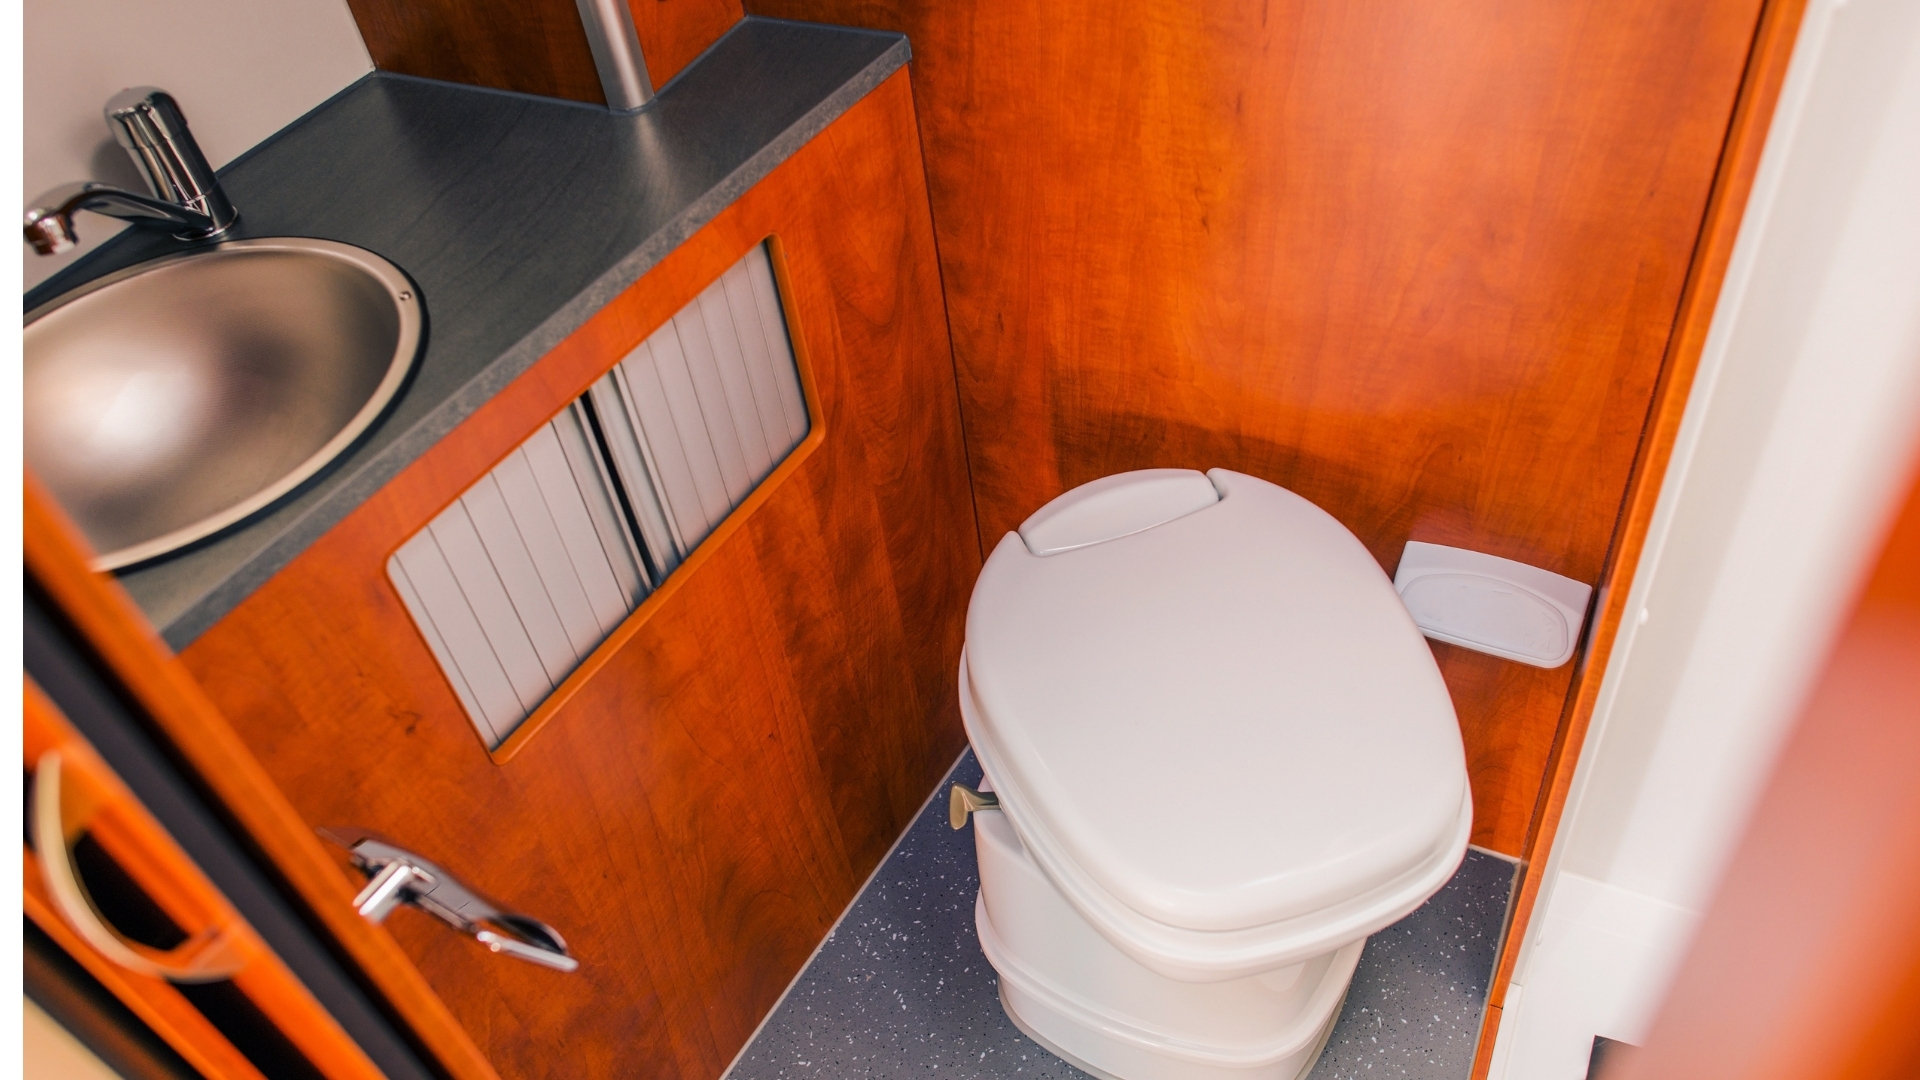 A small RV bathroom is no place to store your laundry